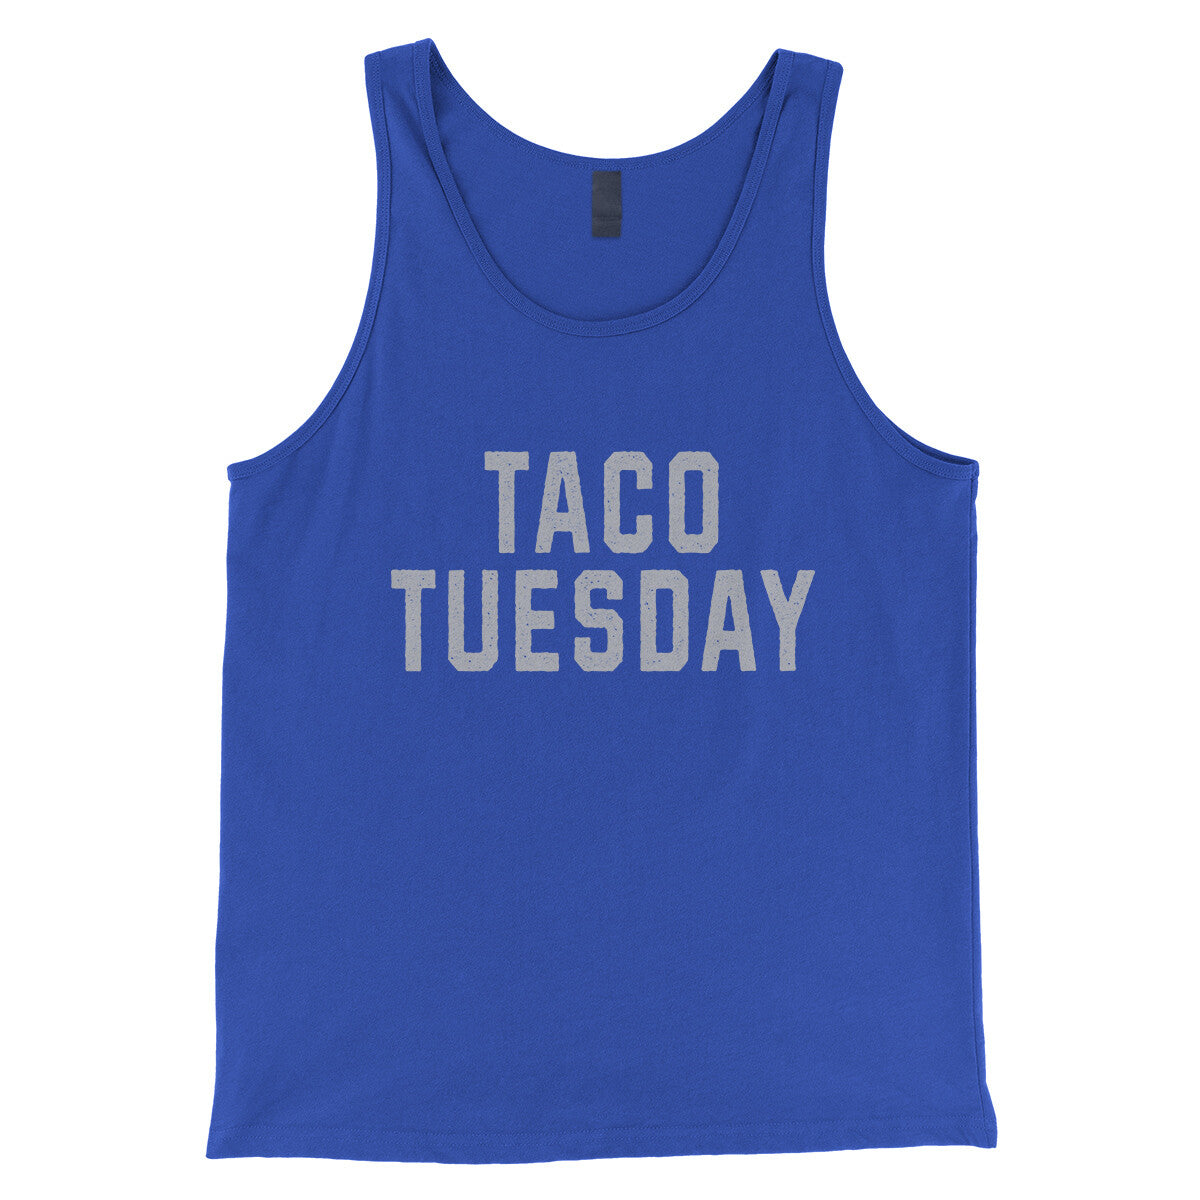 Taco Tuesday in True Royal Color